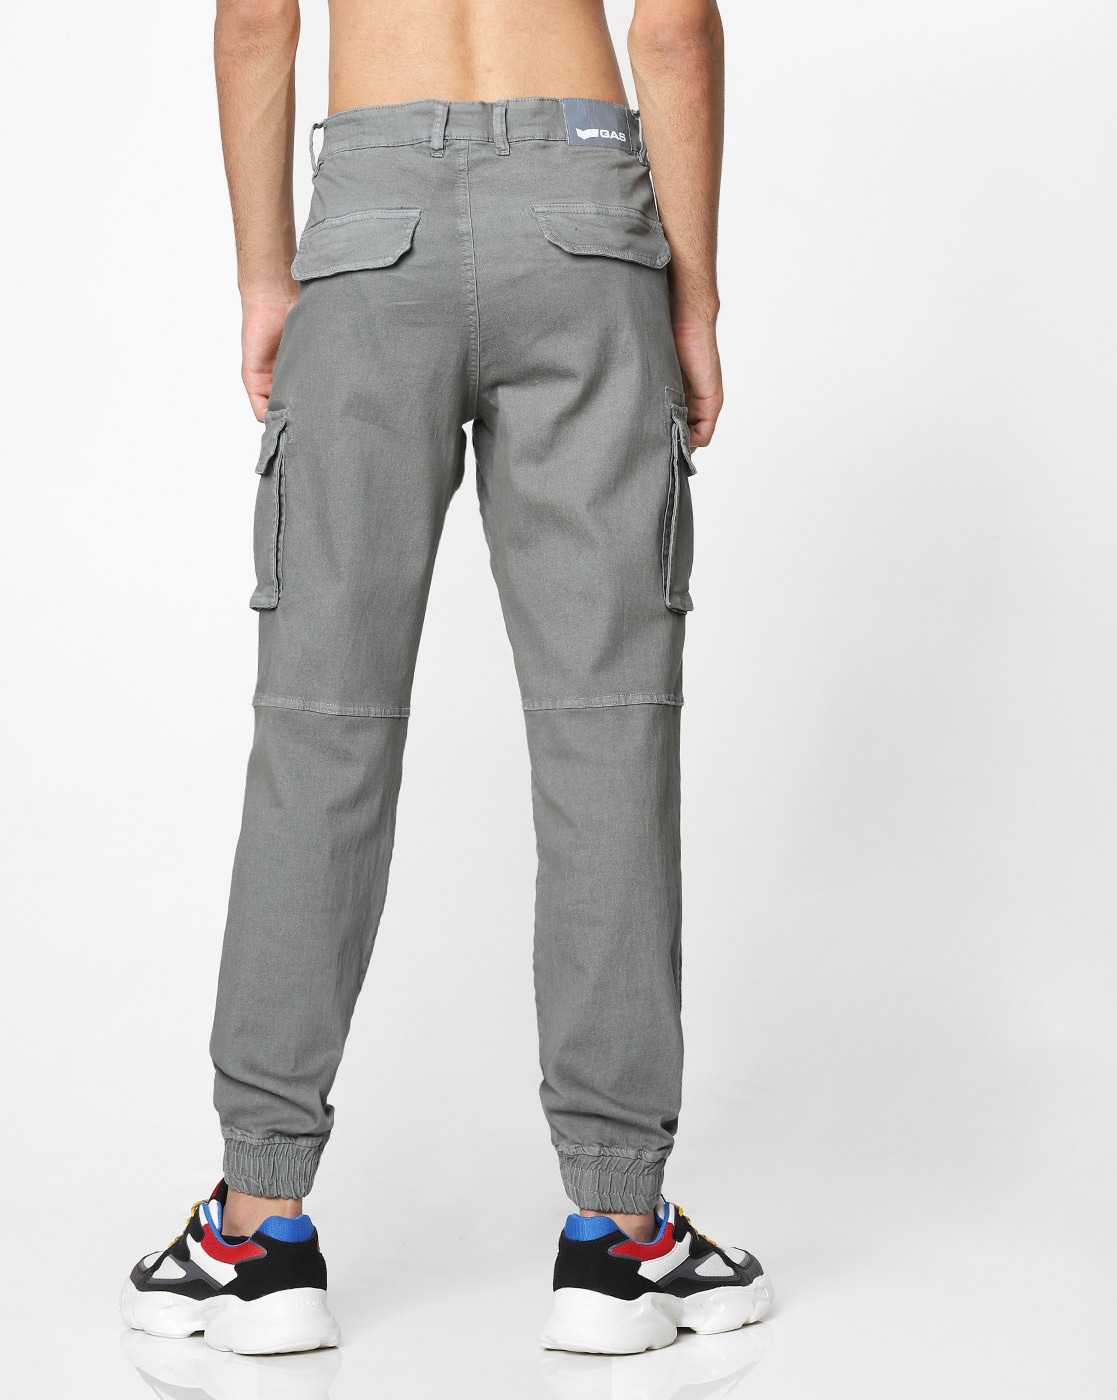 Mens Midwaist Zip Cargo Pants Relaxed Fit Solid Cargo Trousers With Multi pocket  Walmartcom